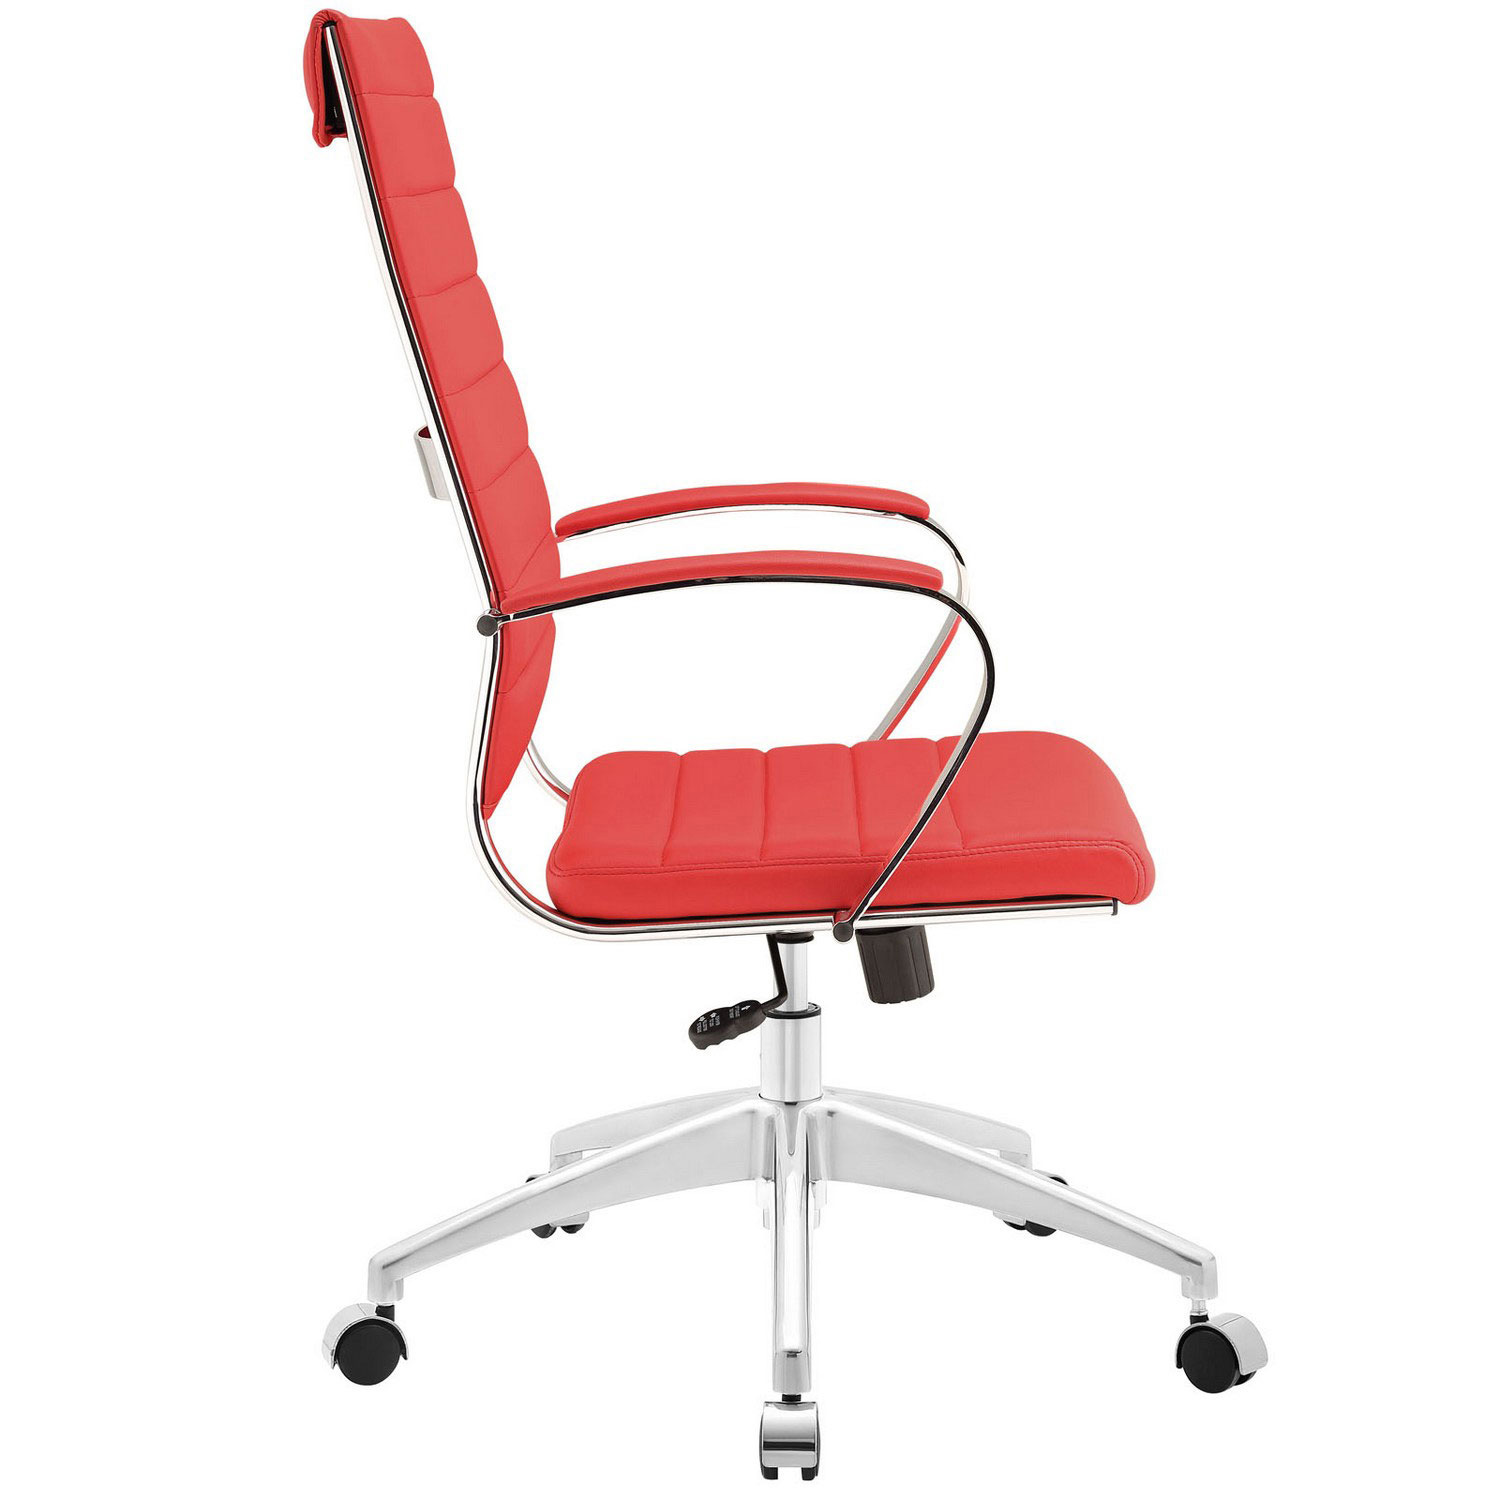 Modway Jive Highback Office Chair - Red